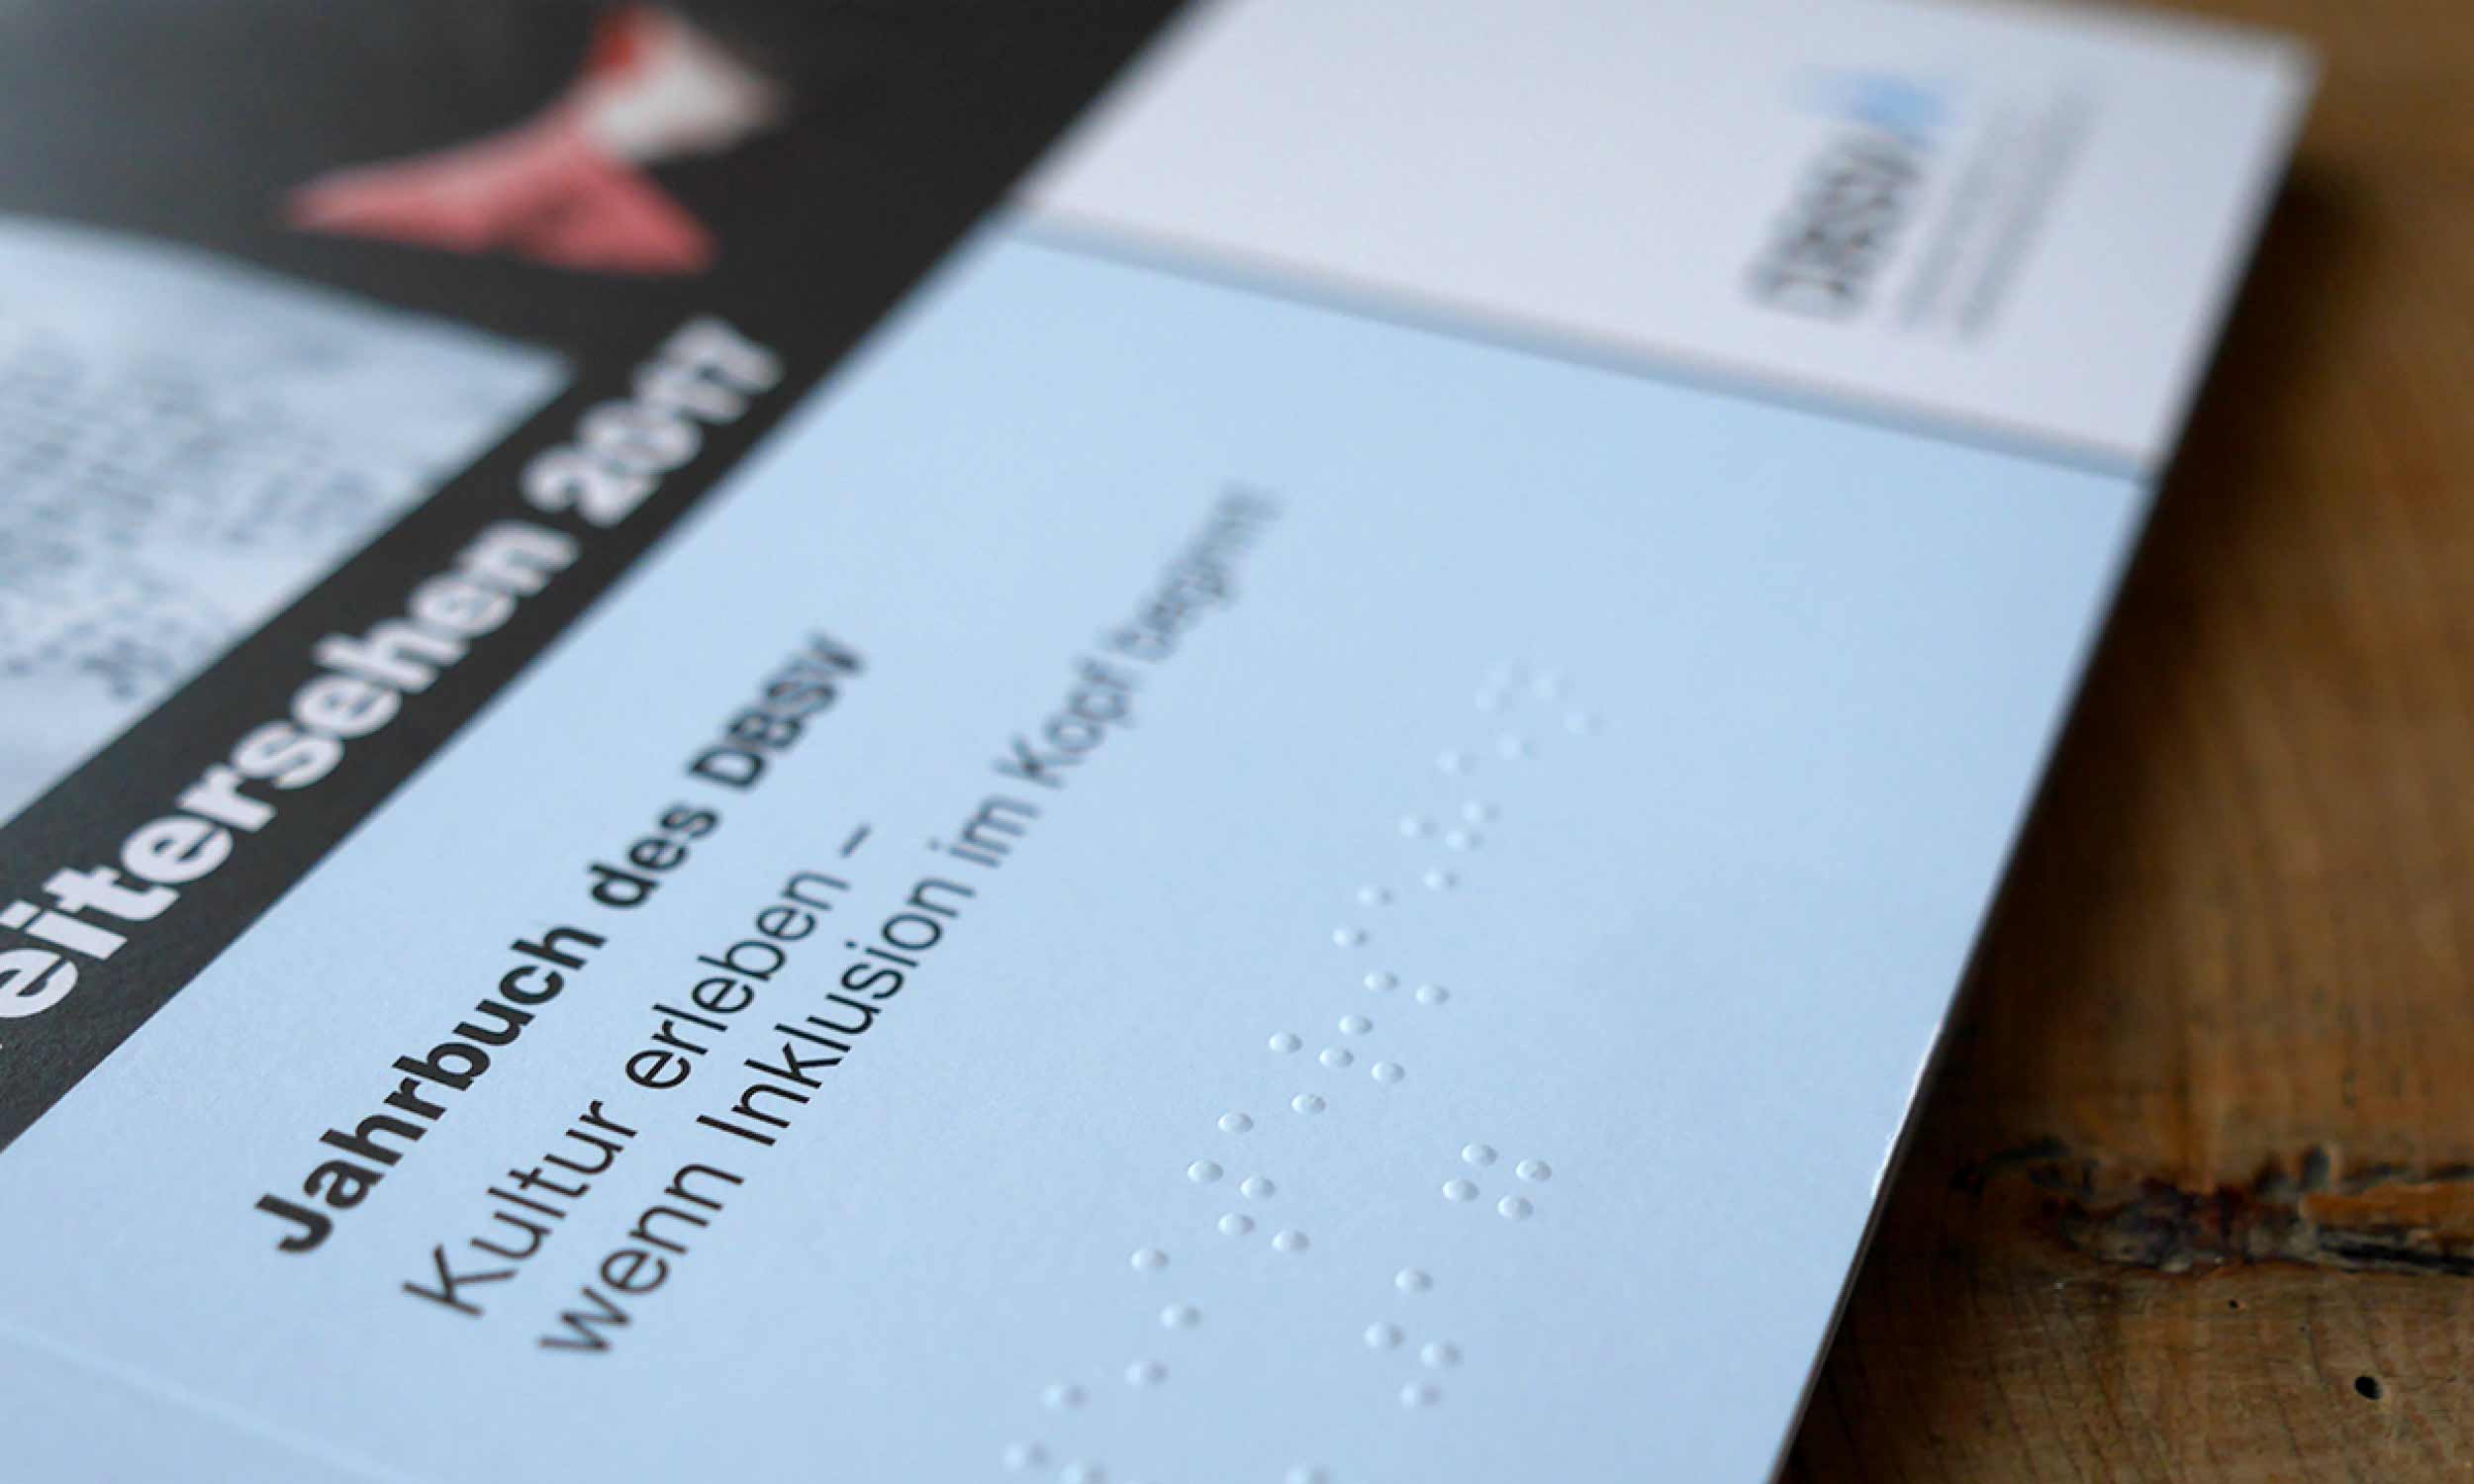 Detail view of a section of the cover of Weitersehen 2017, on which the title can also be seen in Braille.